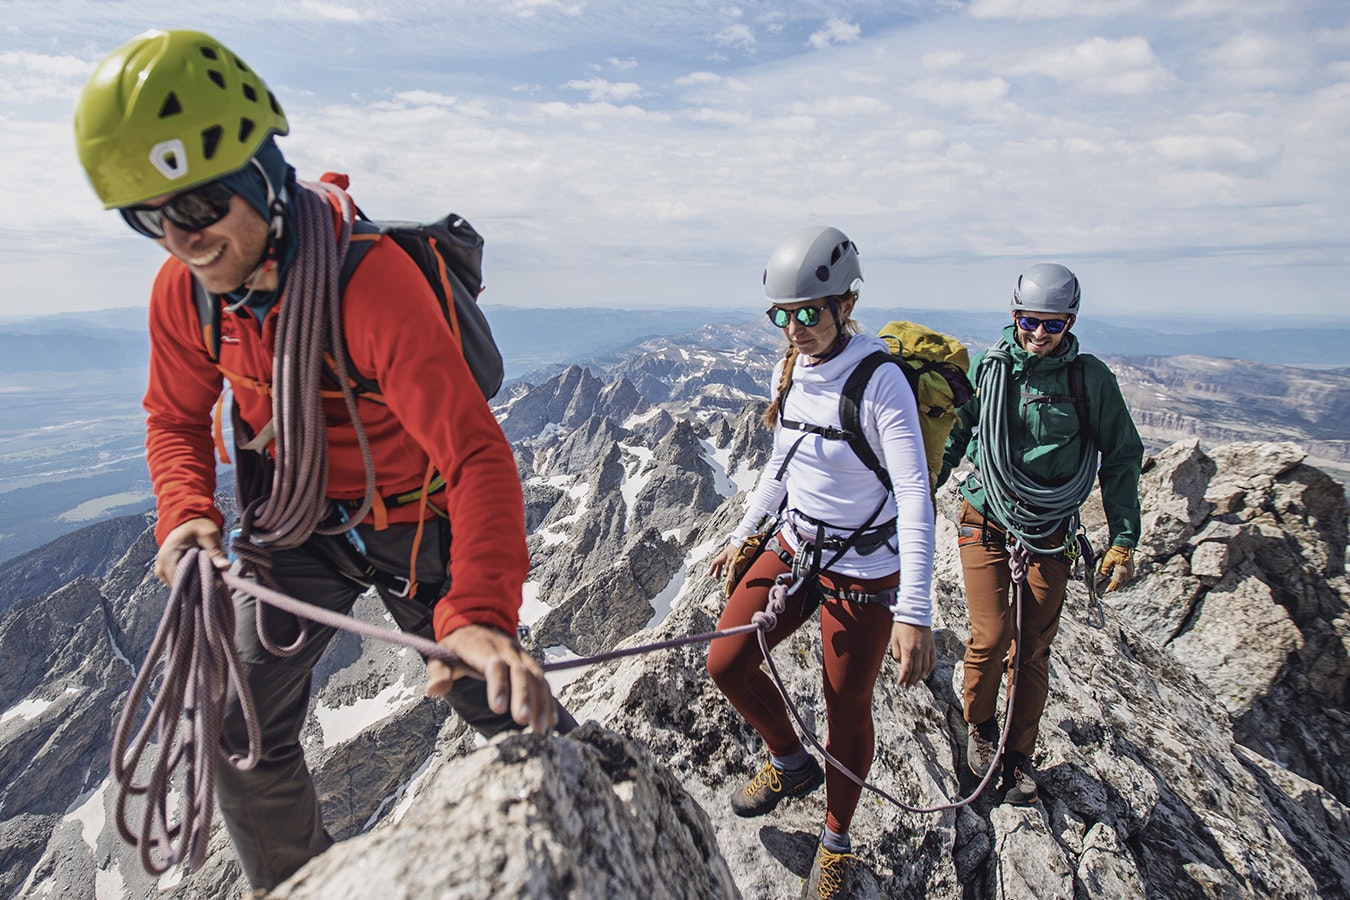 A group of hikers and climbers summit a peak in the Grand Tetons of Wyoming.